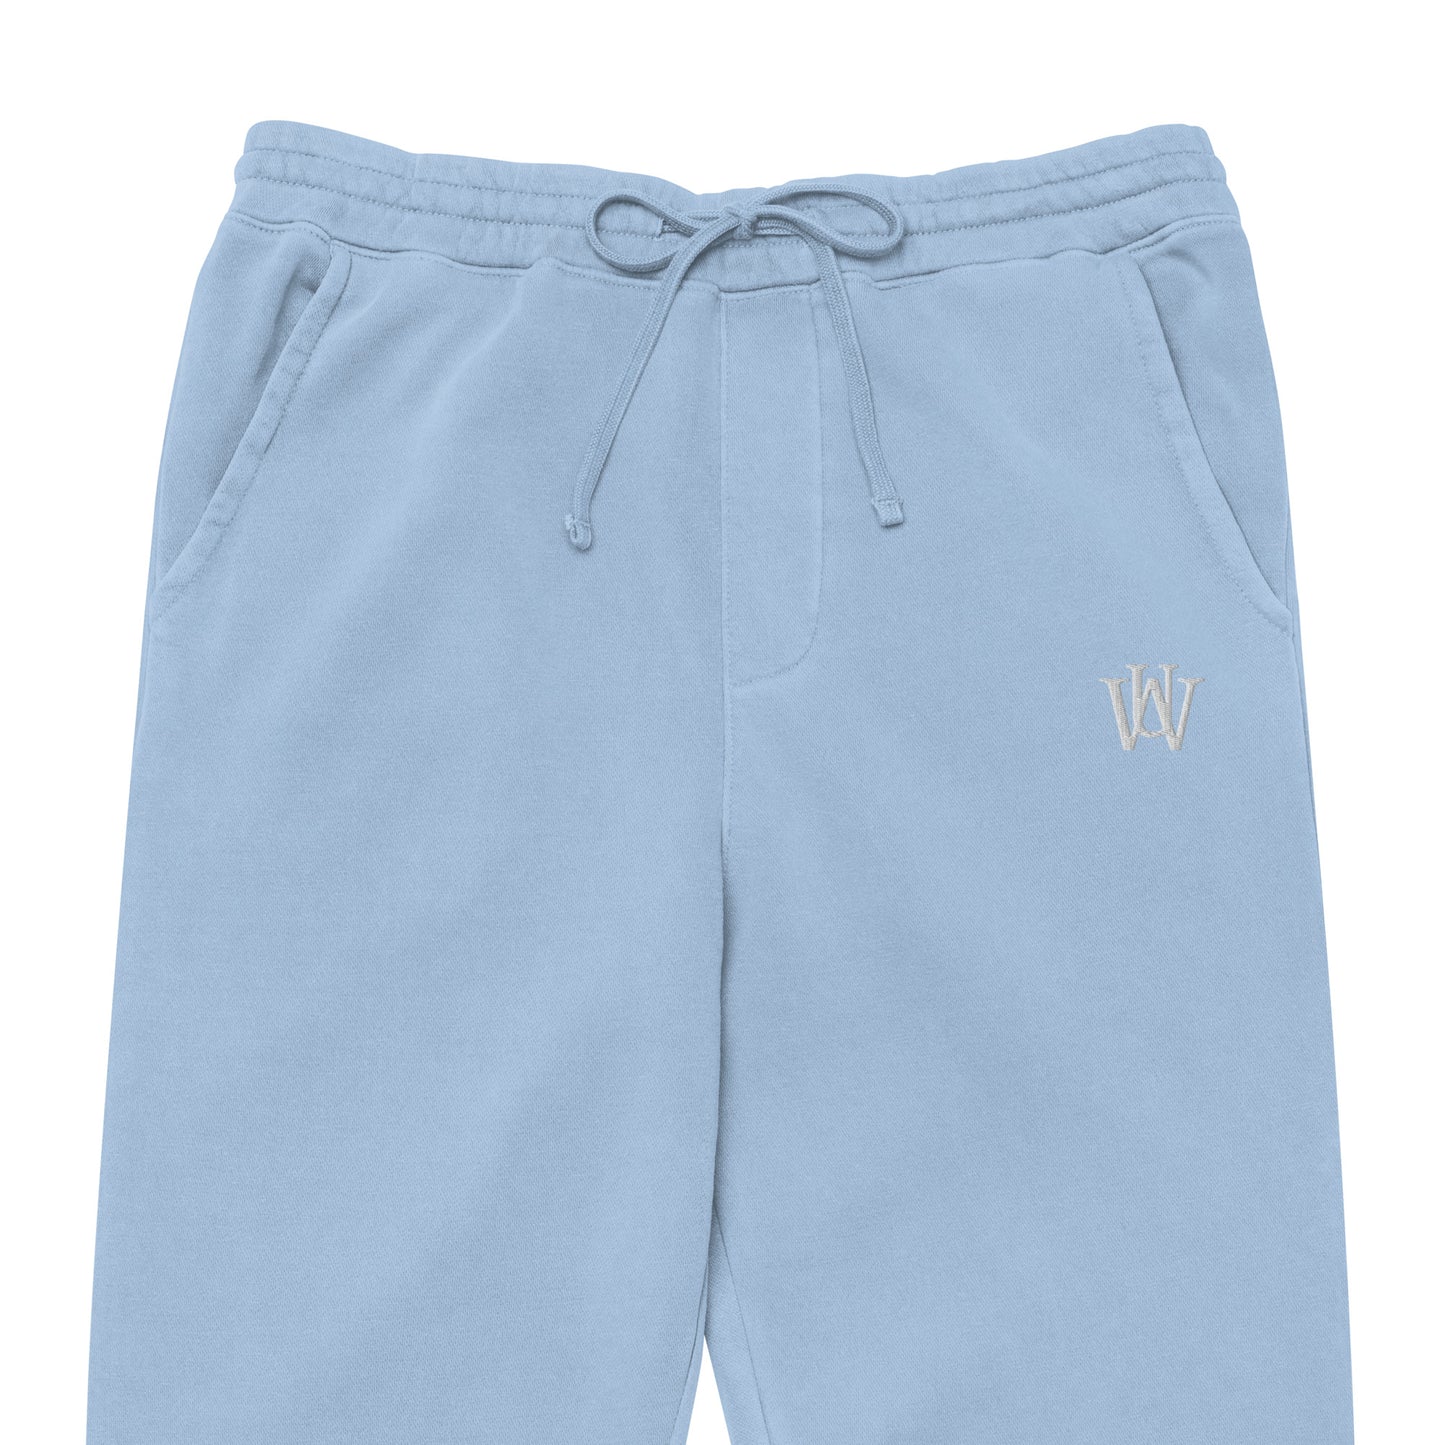 WAKE UP Pigment-Dyed Sweatpants (Embroidery)